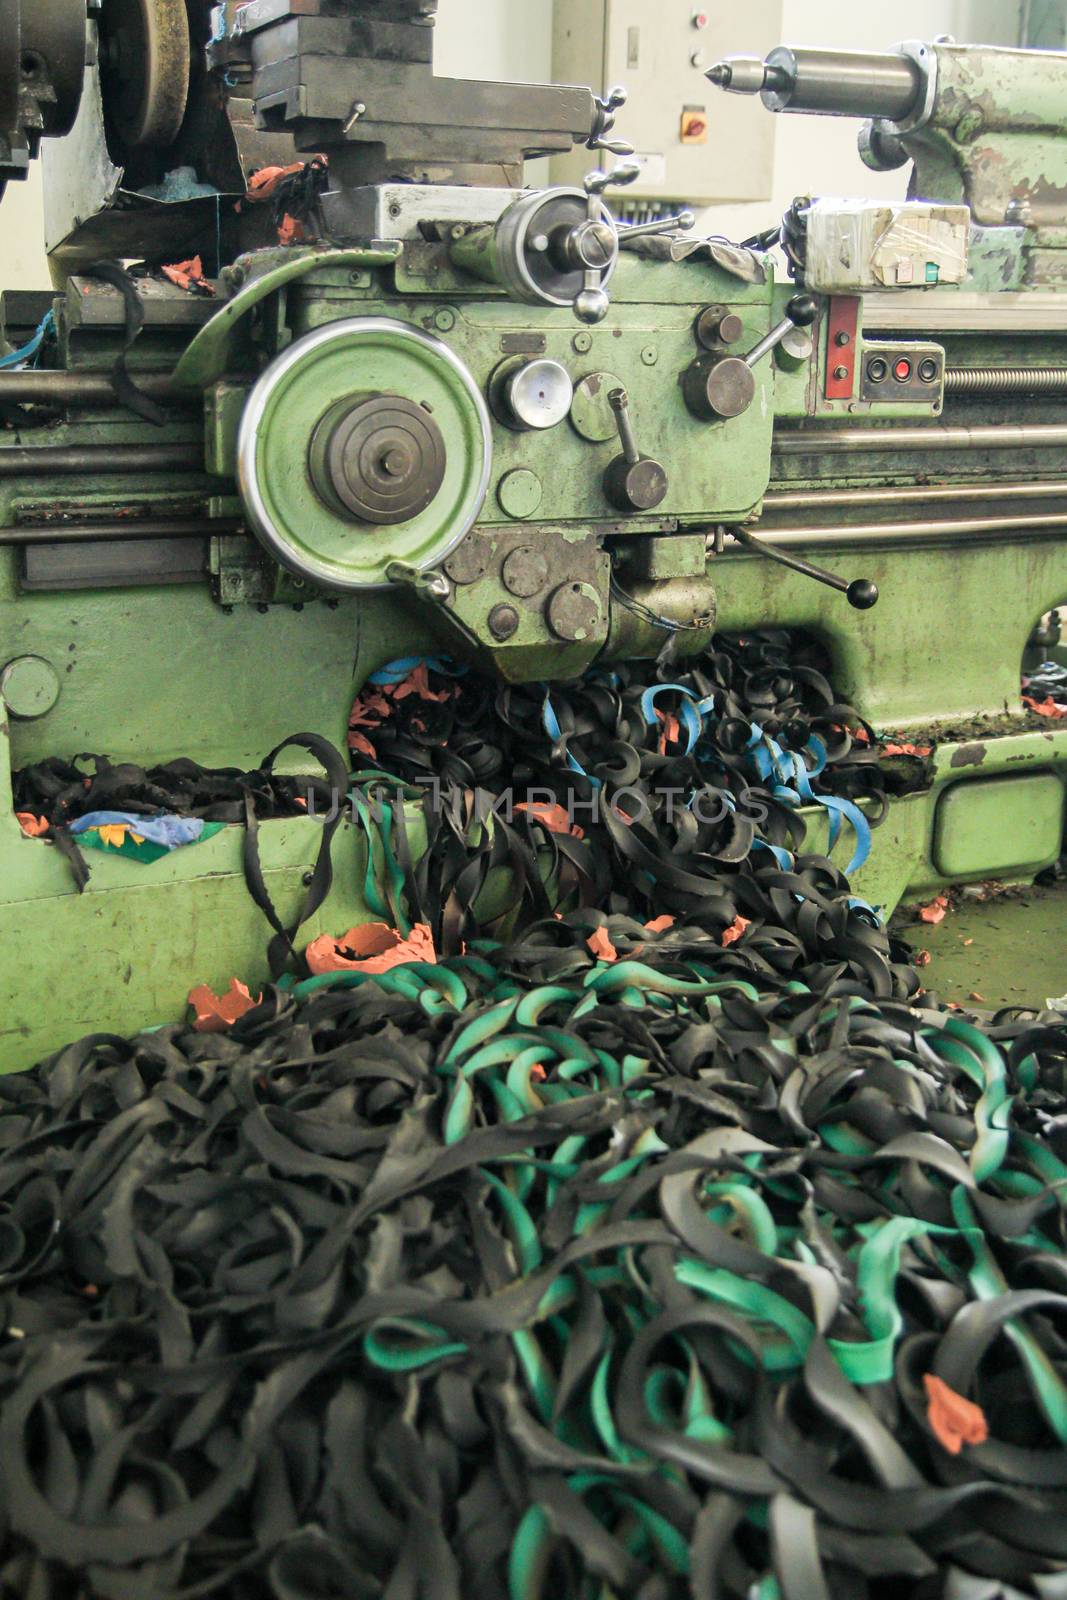 Waste Material from Lathe Machine